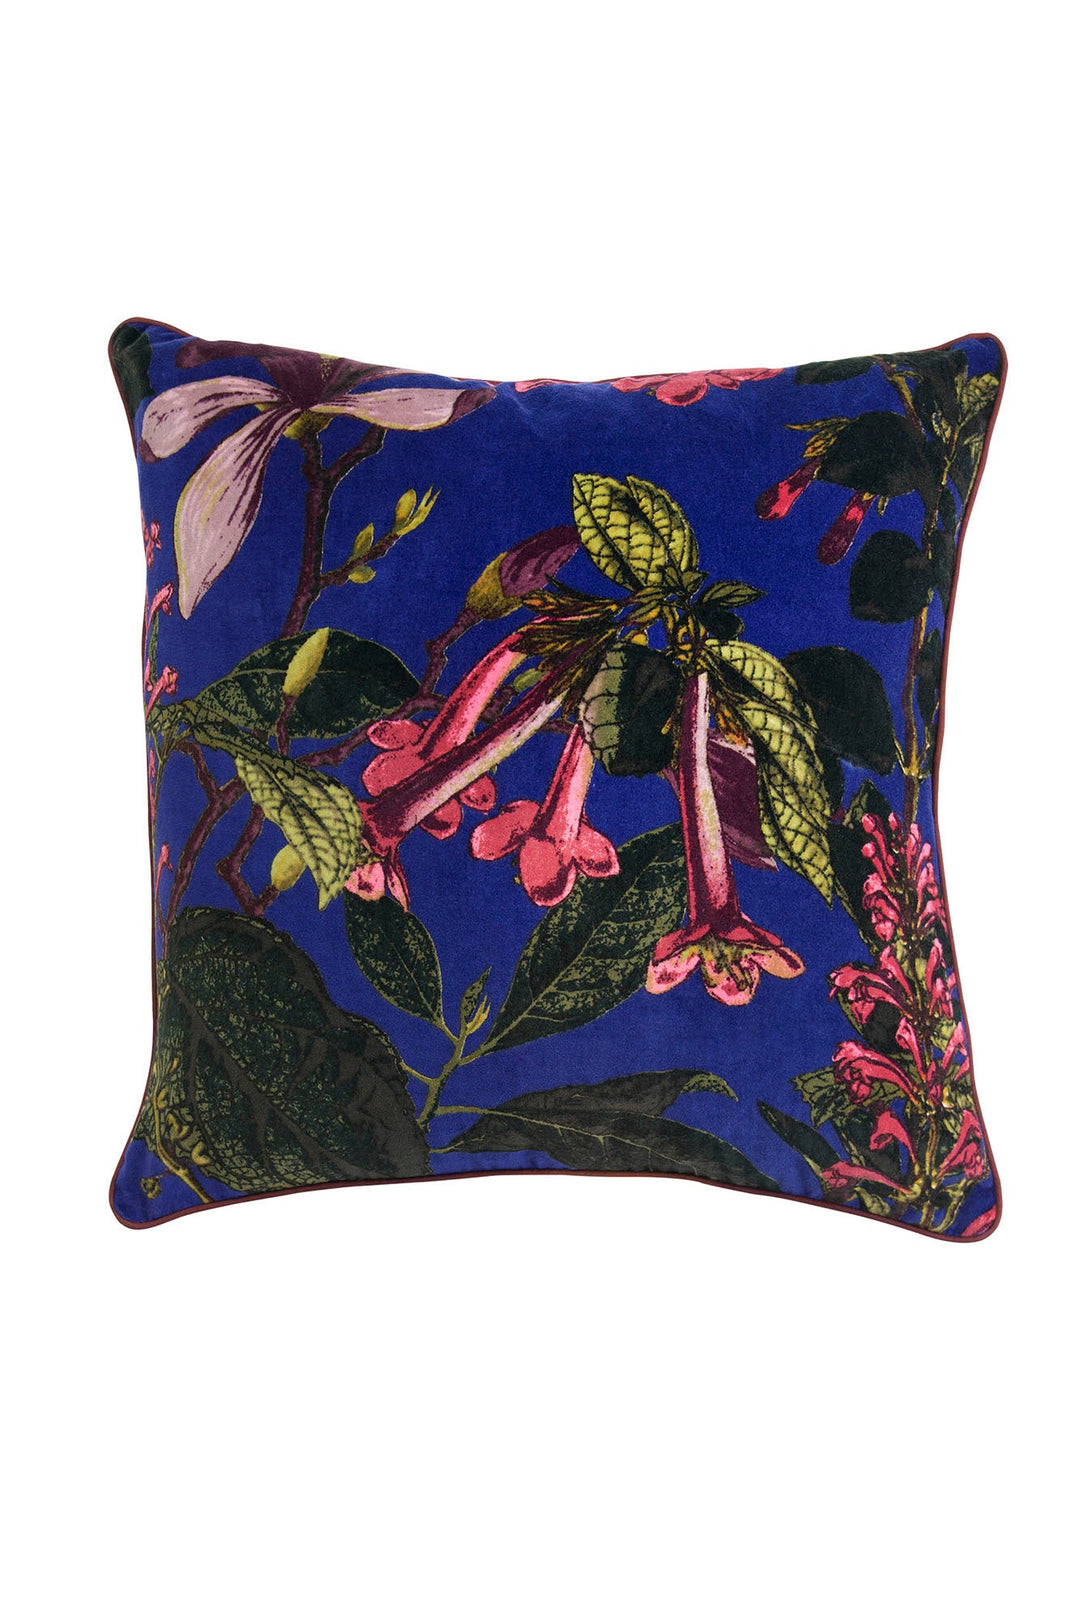 KEW Magnolia Purple Velvet Square Cushion- These limited edition velvet cushions are 50 x 50cm and can purchased with or without an ethically sourced duck feather inner.